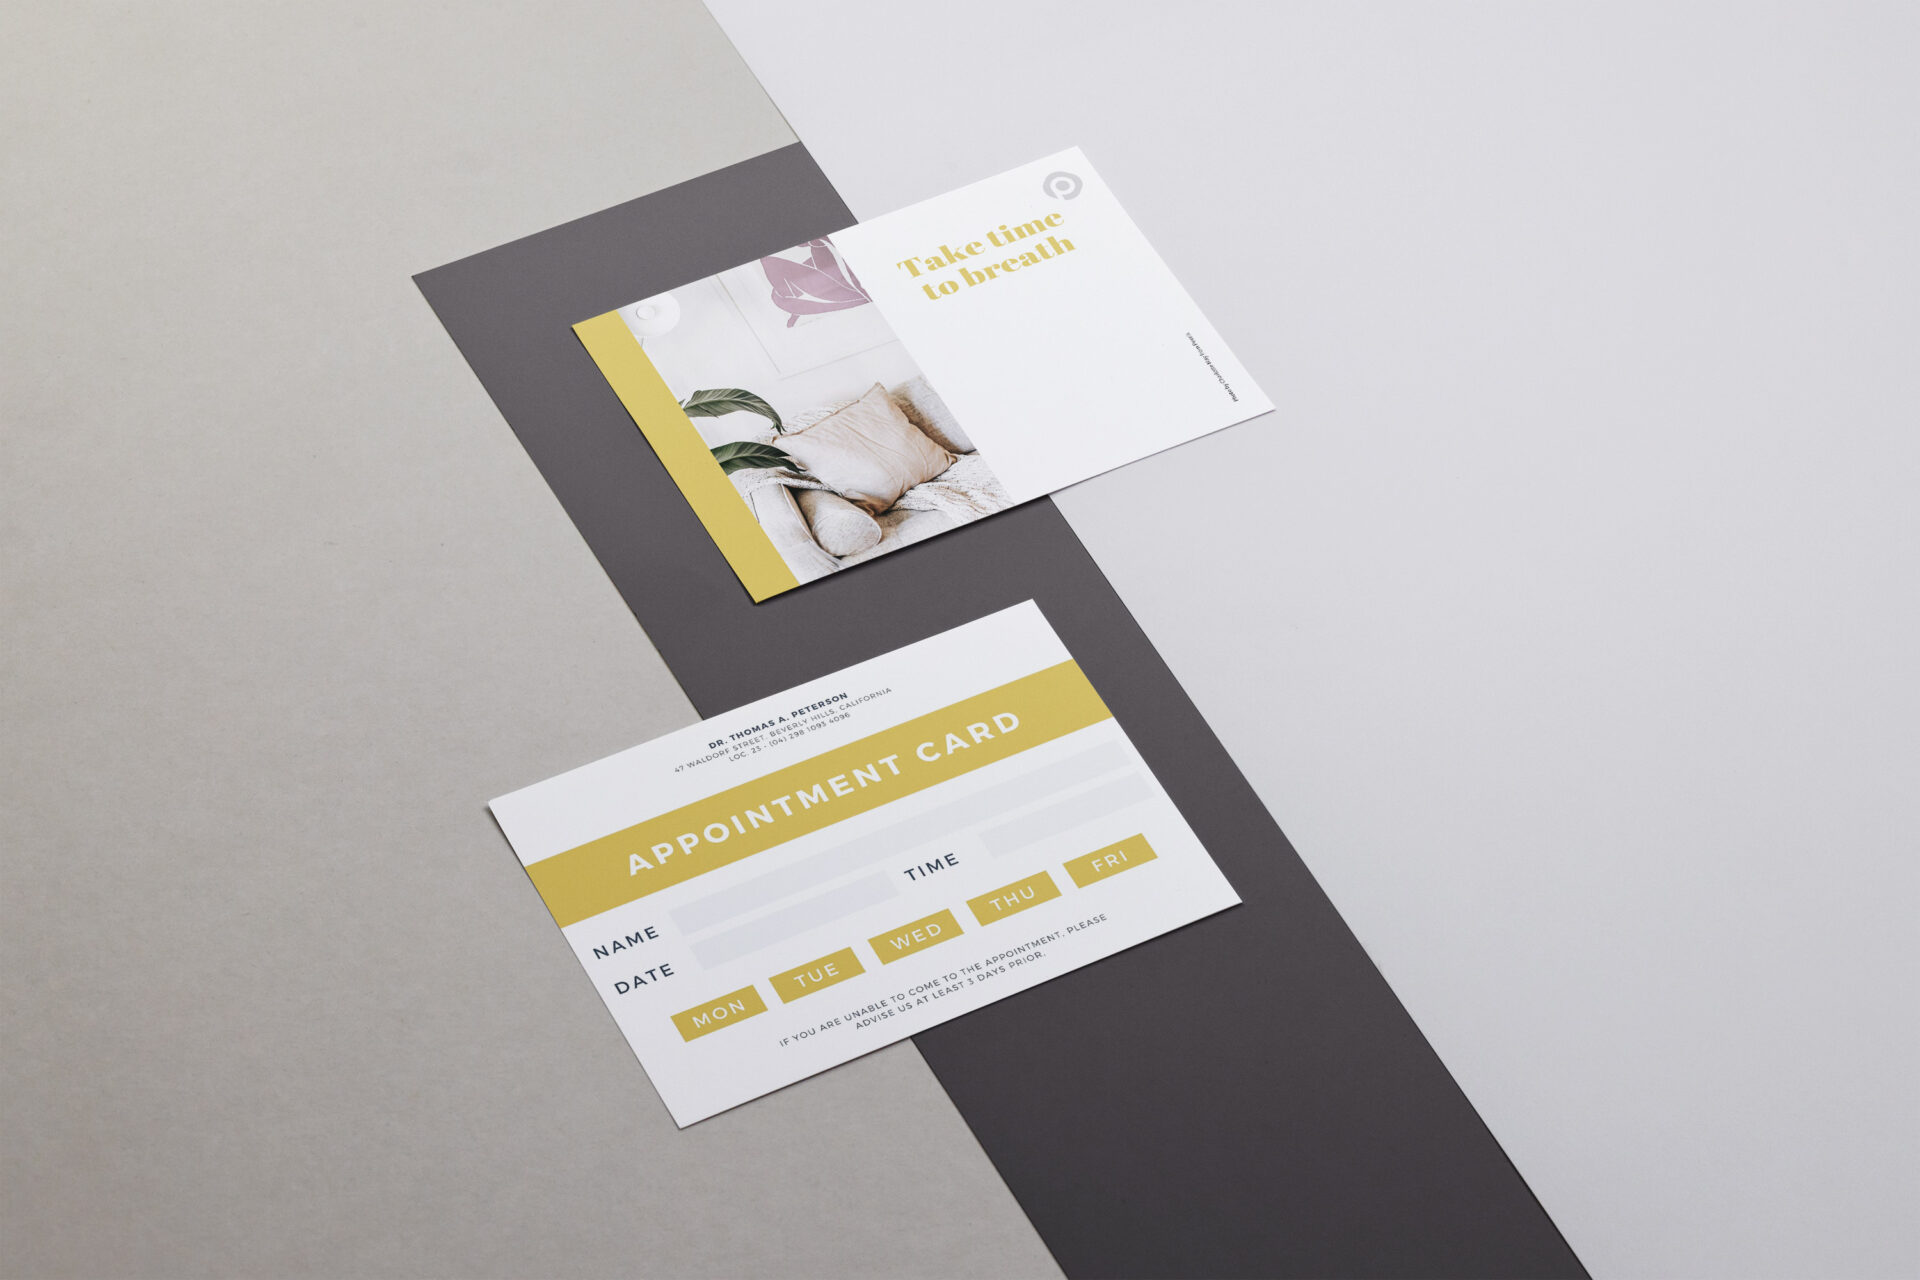 Appointment cards in Gold Coast - Print with Pagerr